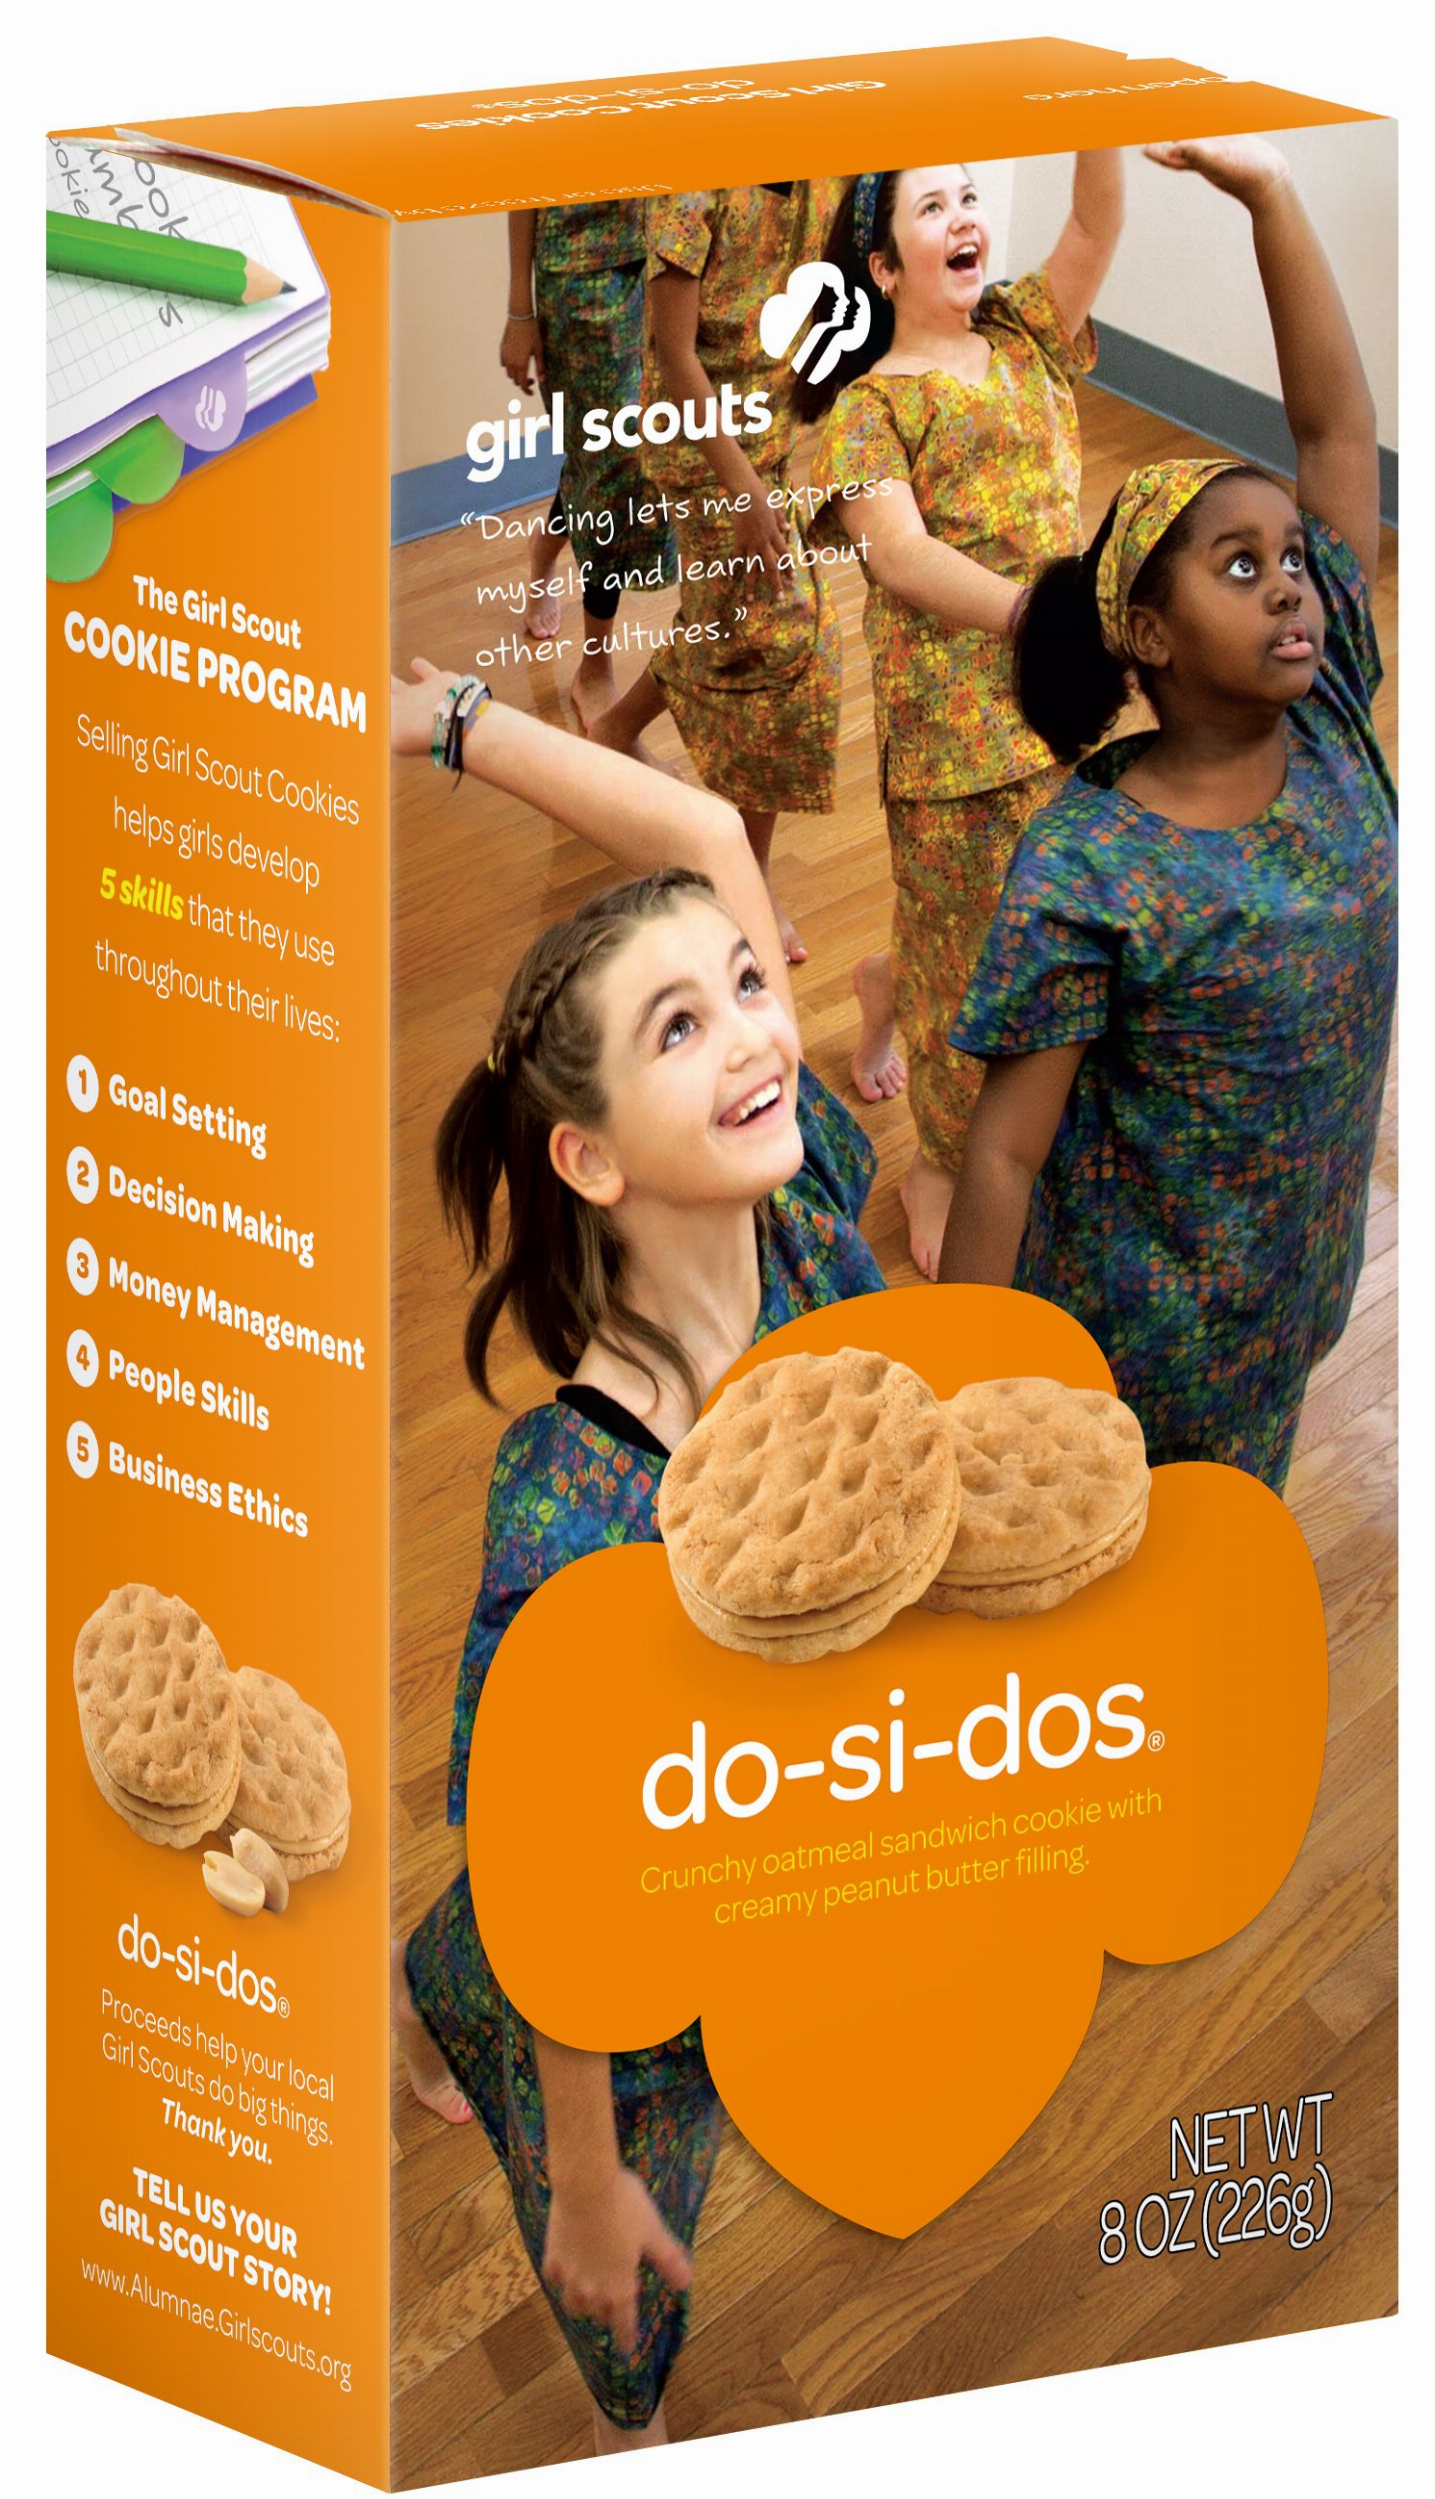 New Girl Scout Cookies - Do-si-dos Box... | Girl scout cookies, Girl ...